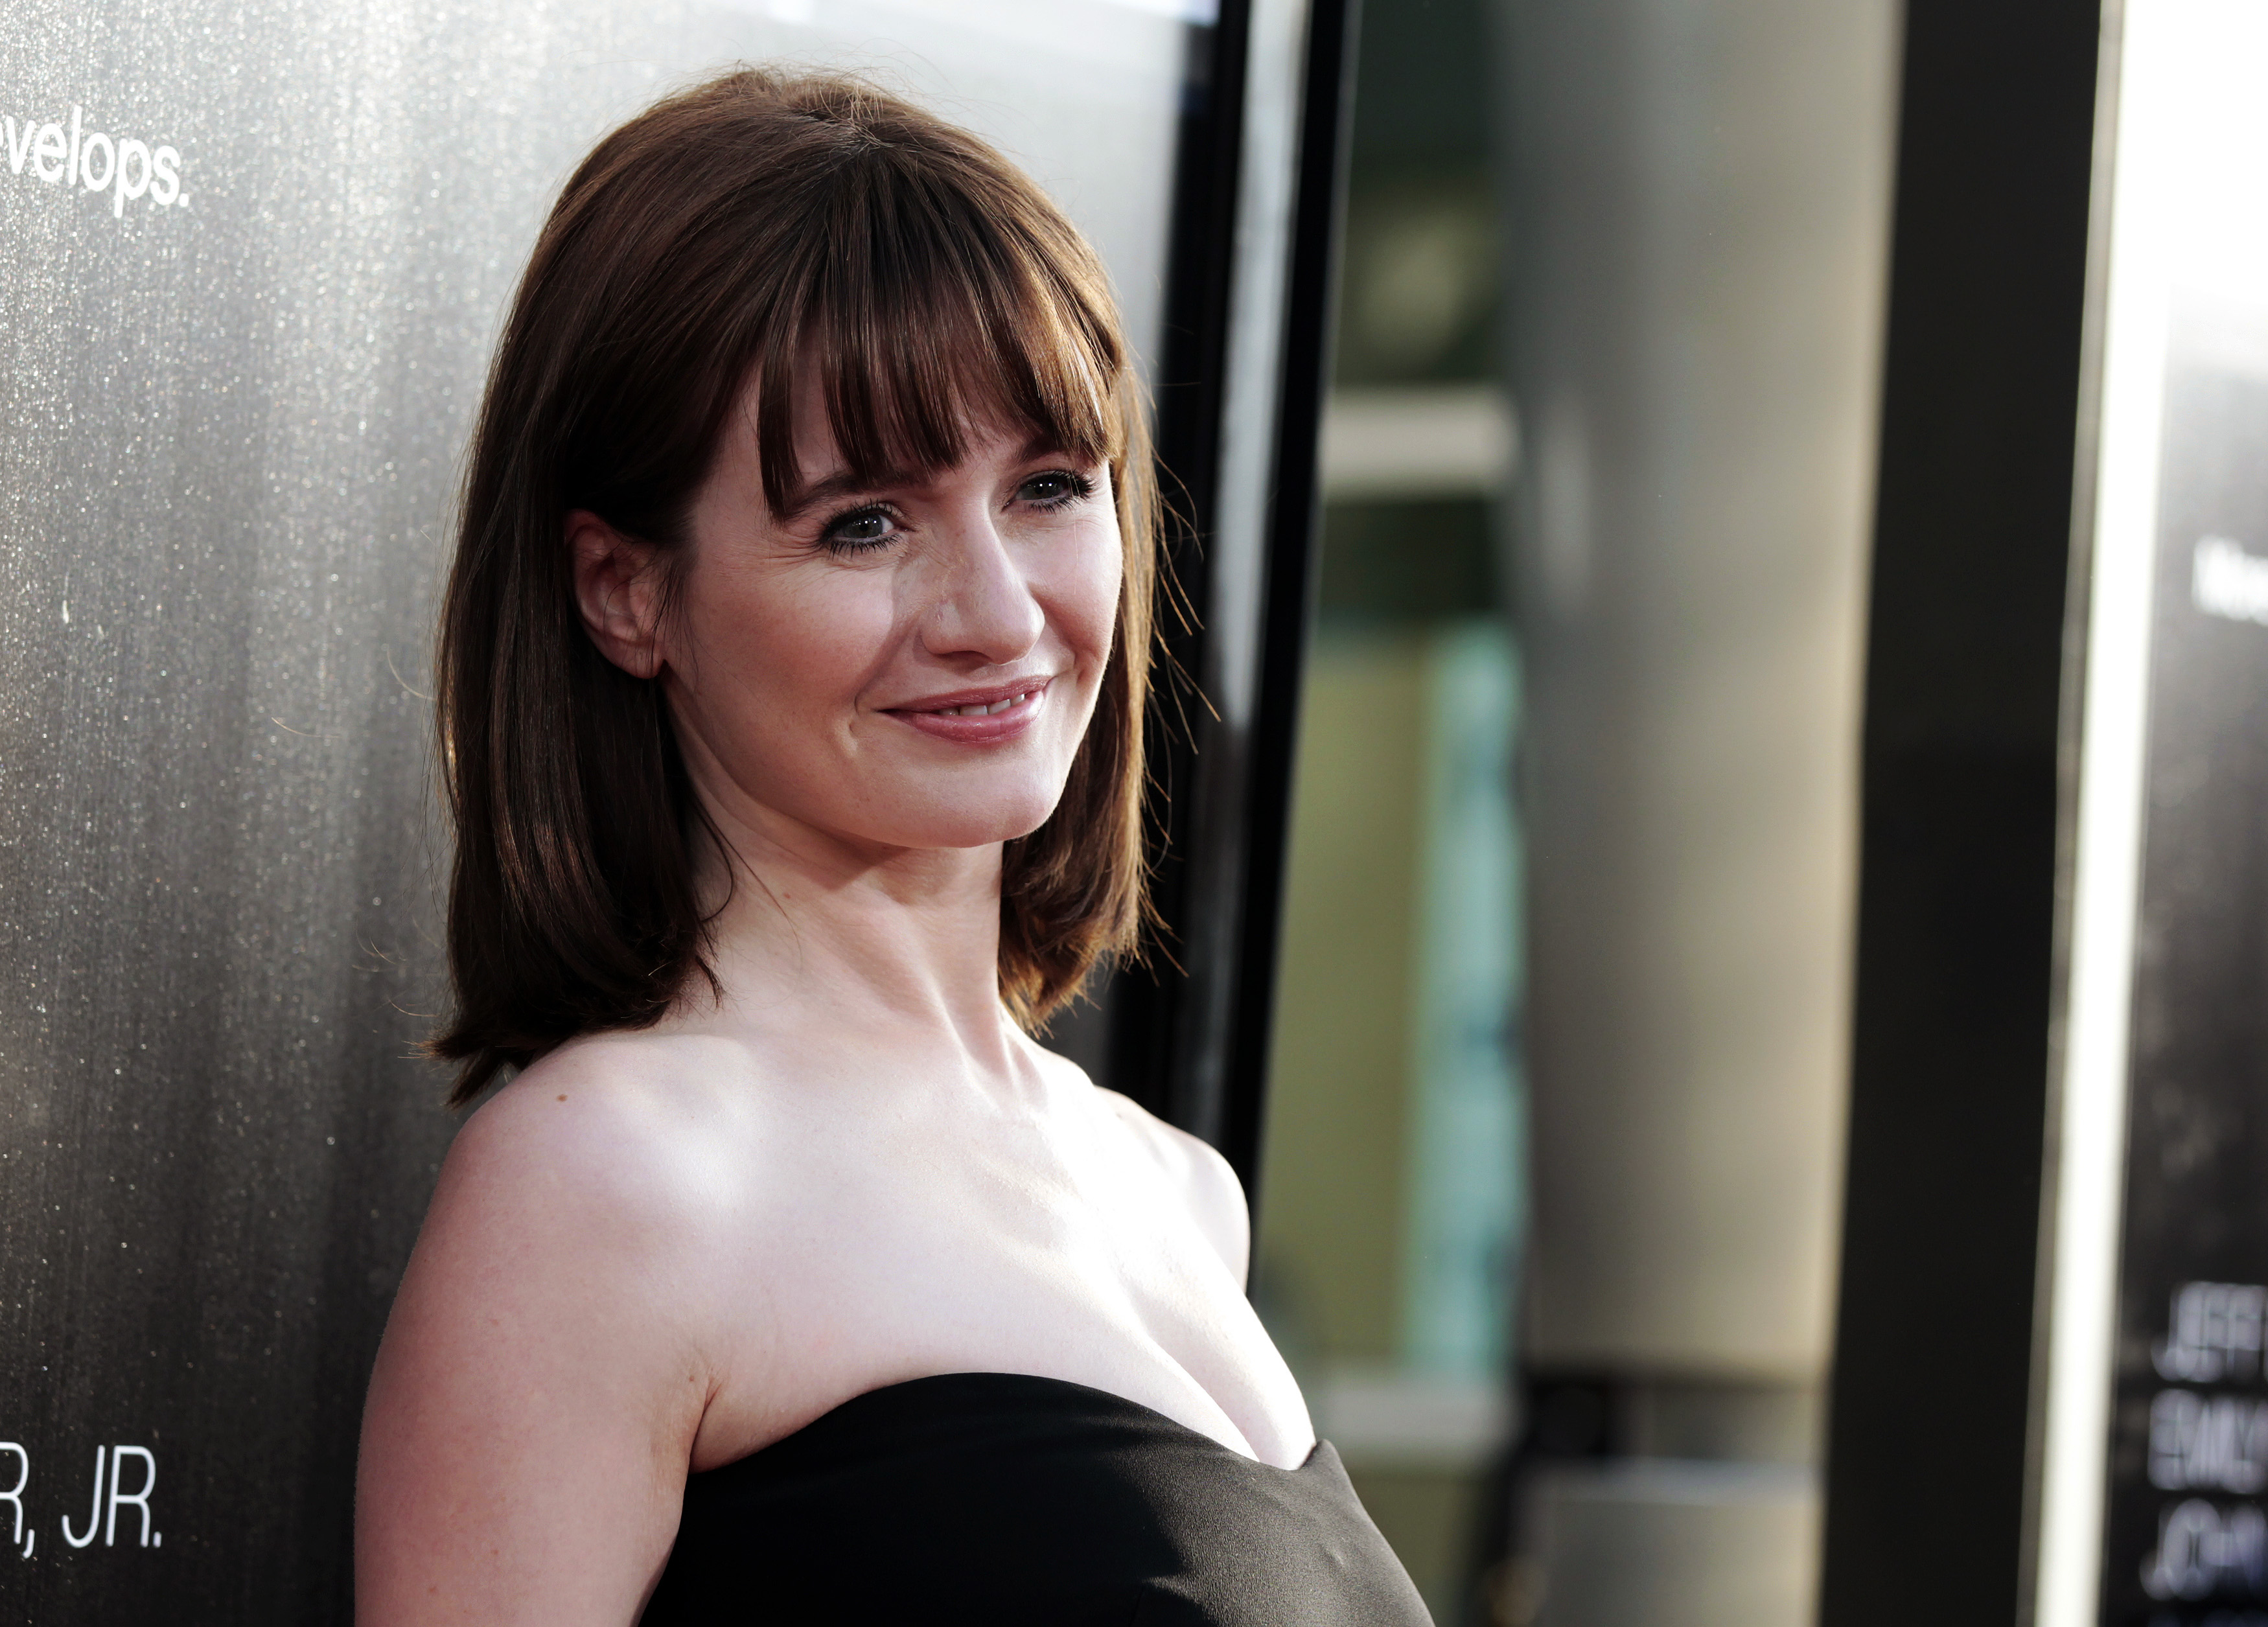 Cast member Emily Mortimer poses at the premiere of the HBO television series "The Newsroom" at the Cinerama Dome in Los Angeles, California June 20, 2012.  REUTERS/Mario Anzuoni  (UNITED STATES - Tags: ENTERTAINMENT) - GM1E86L138201